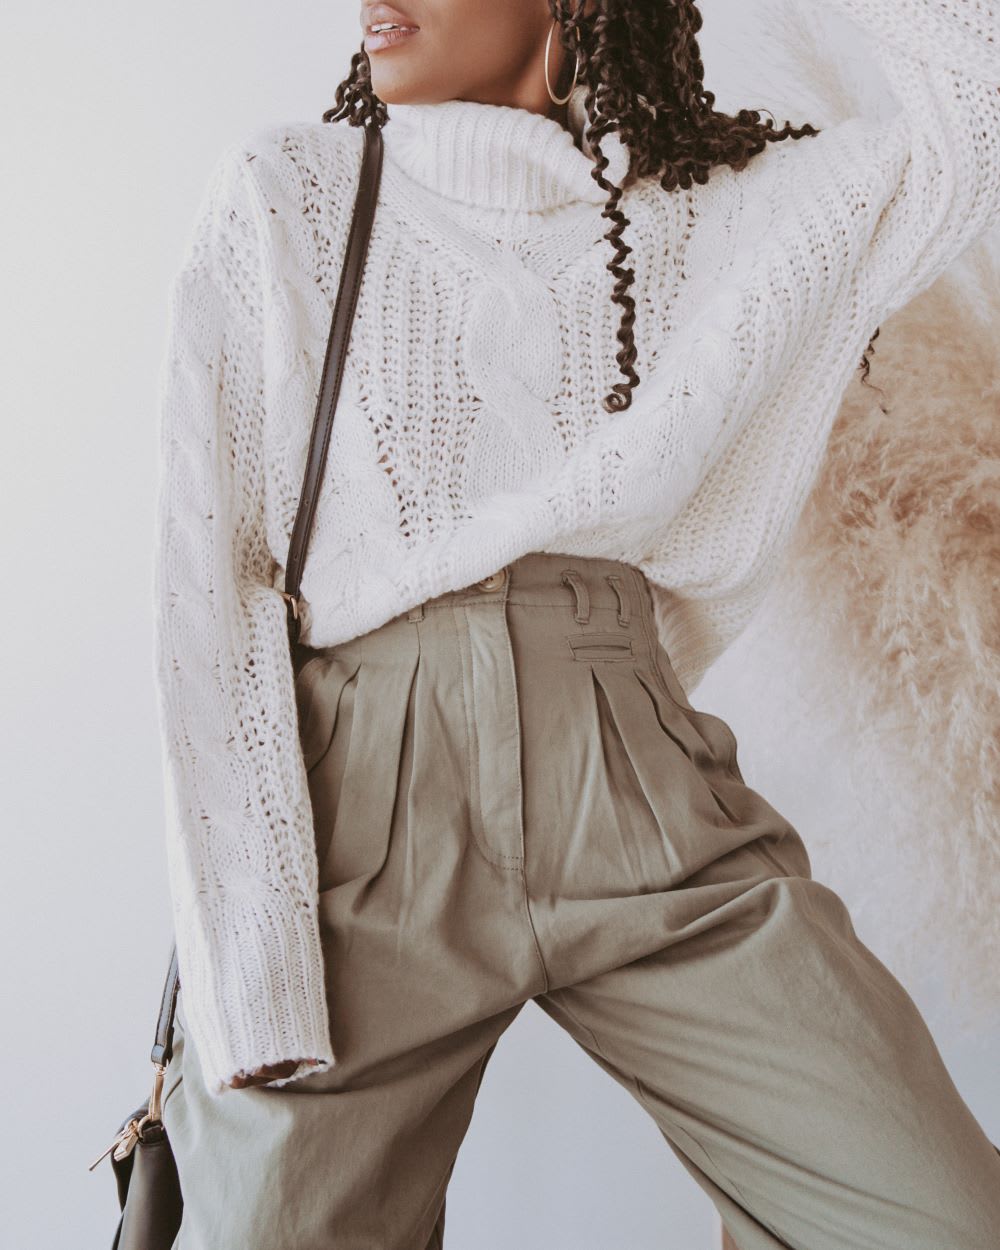 Winter Sweaters: Trends To Live In All Season - Lulus.com Fashion Blog